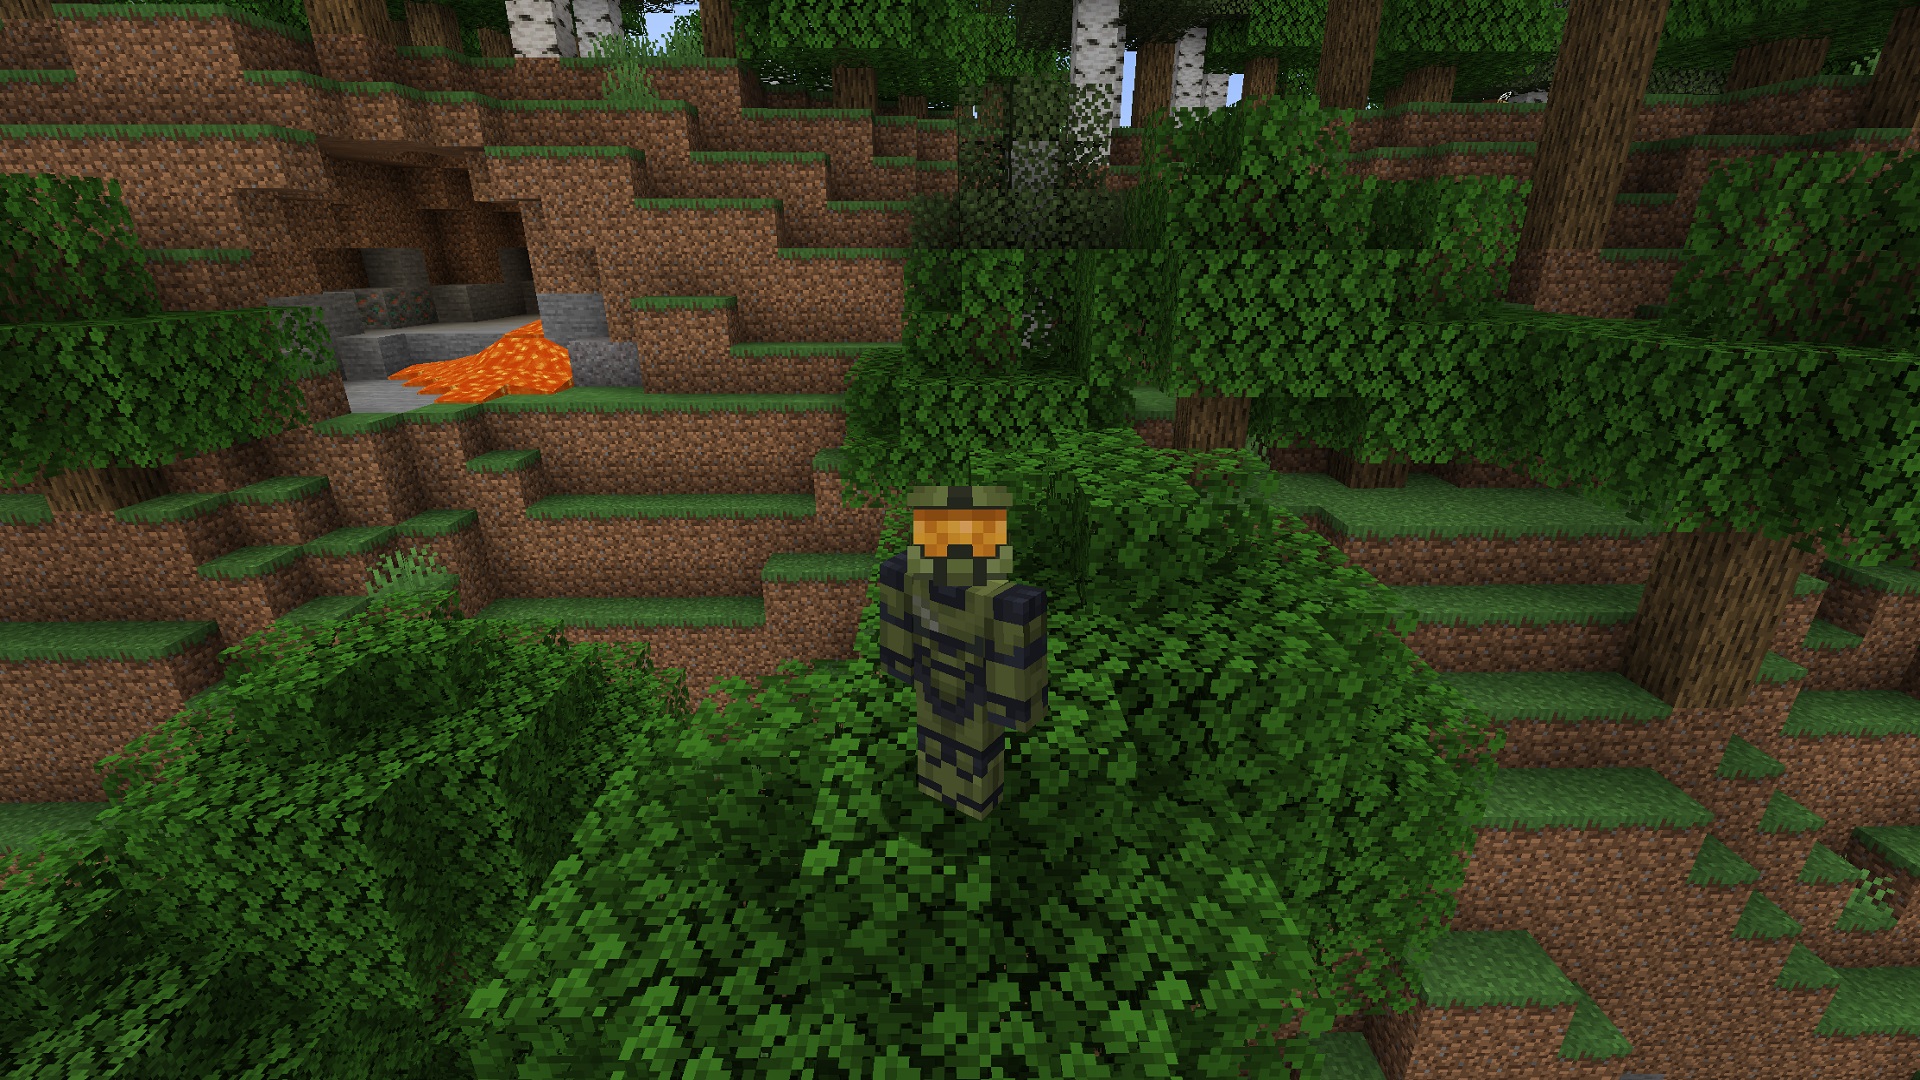 Minecraft skins: The Master Chief from Halo standing on a tree.